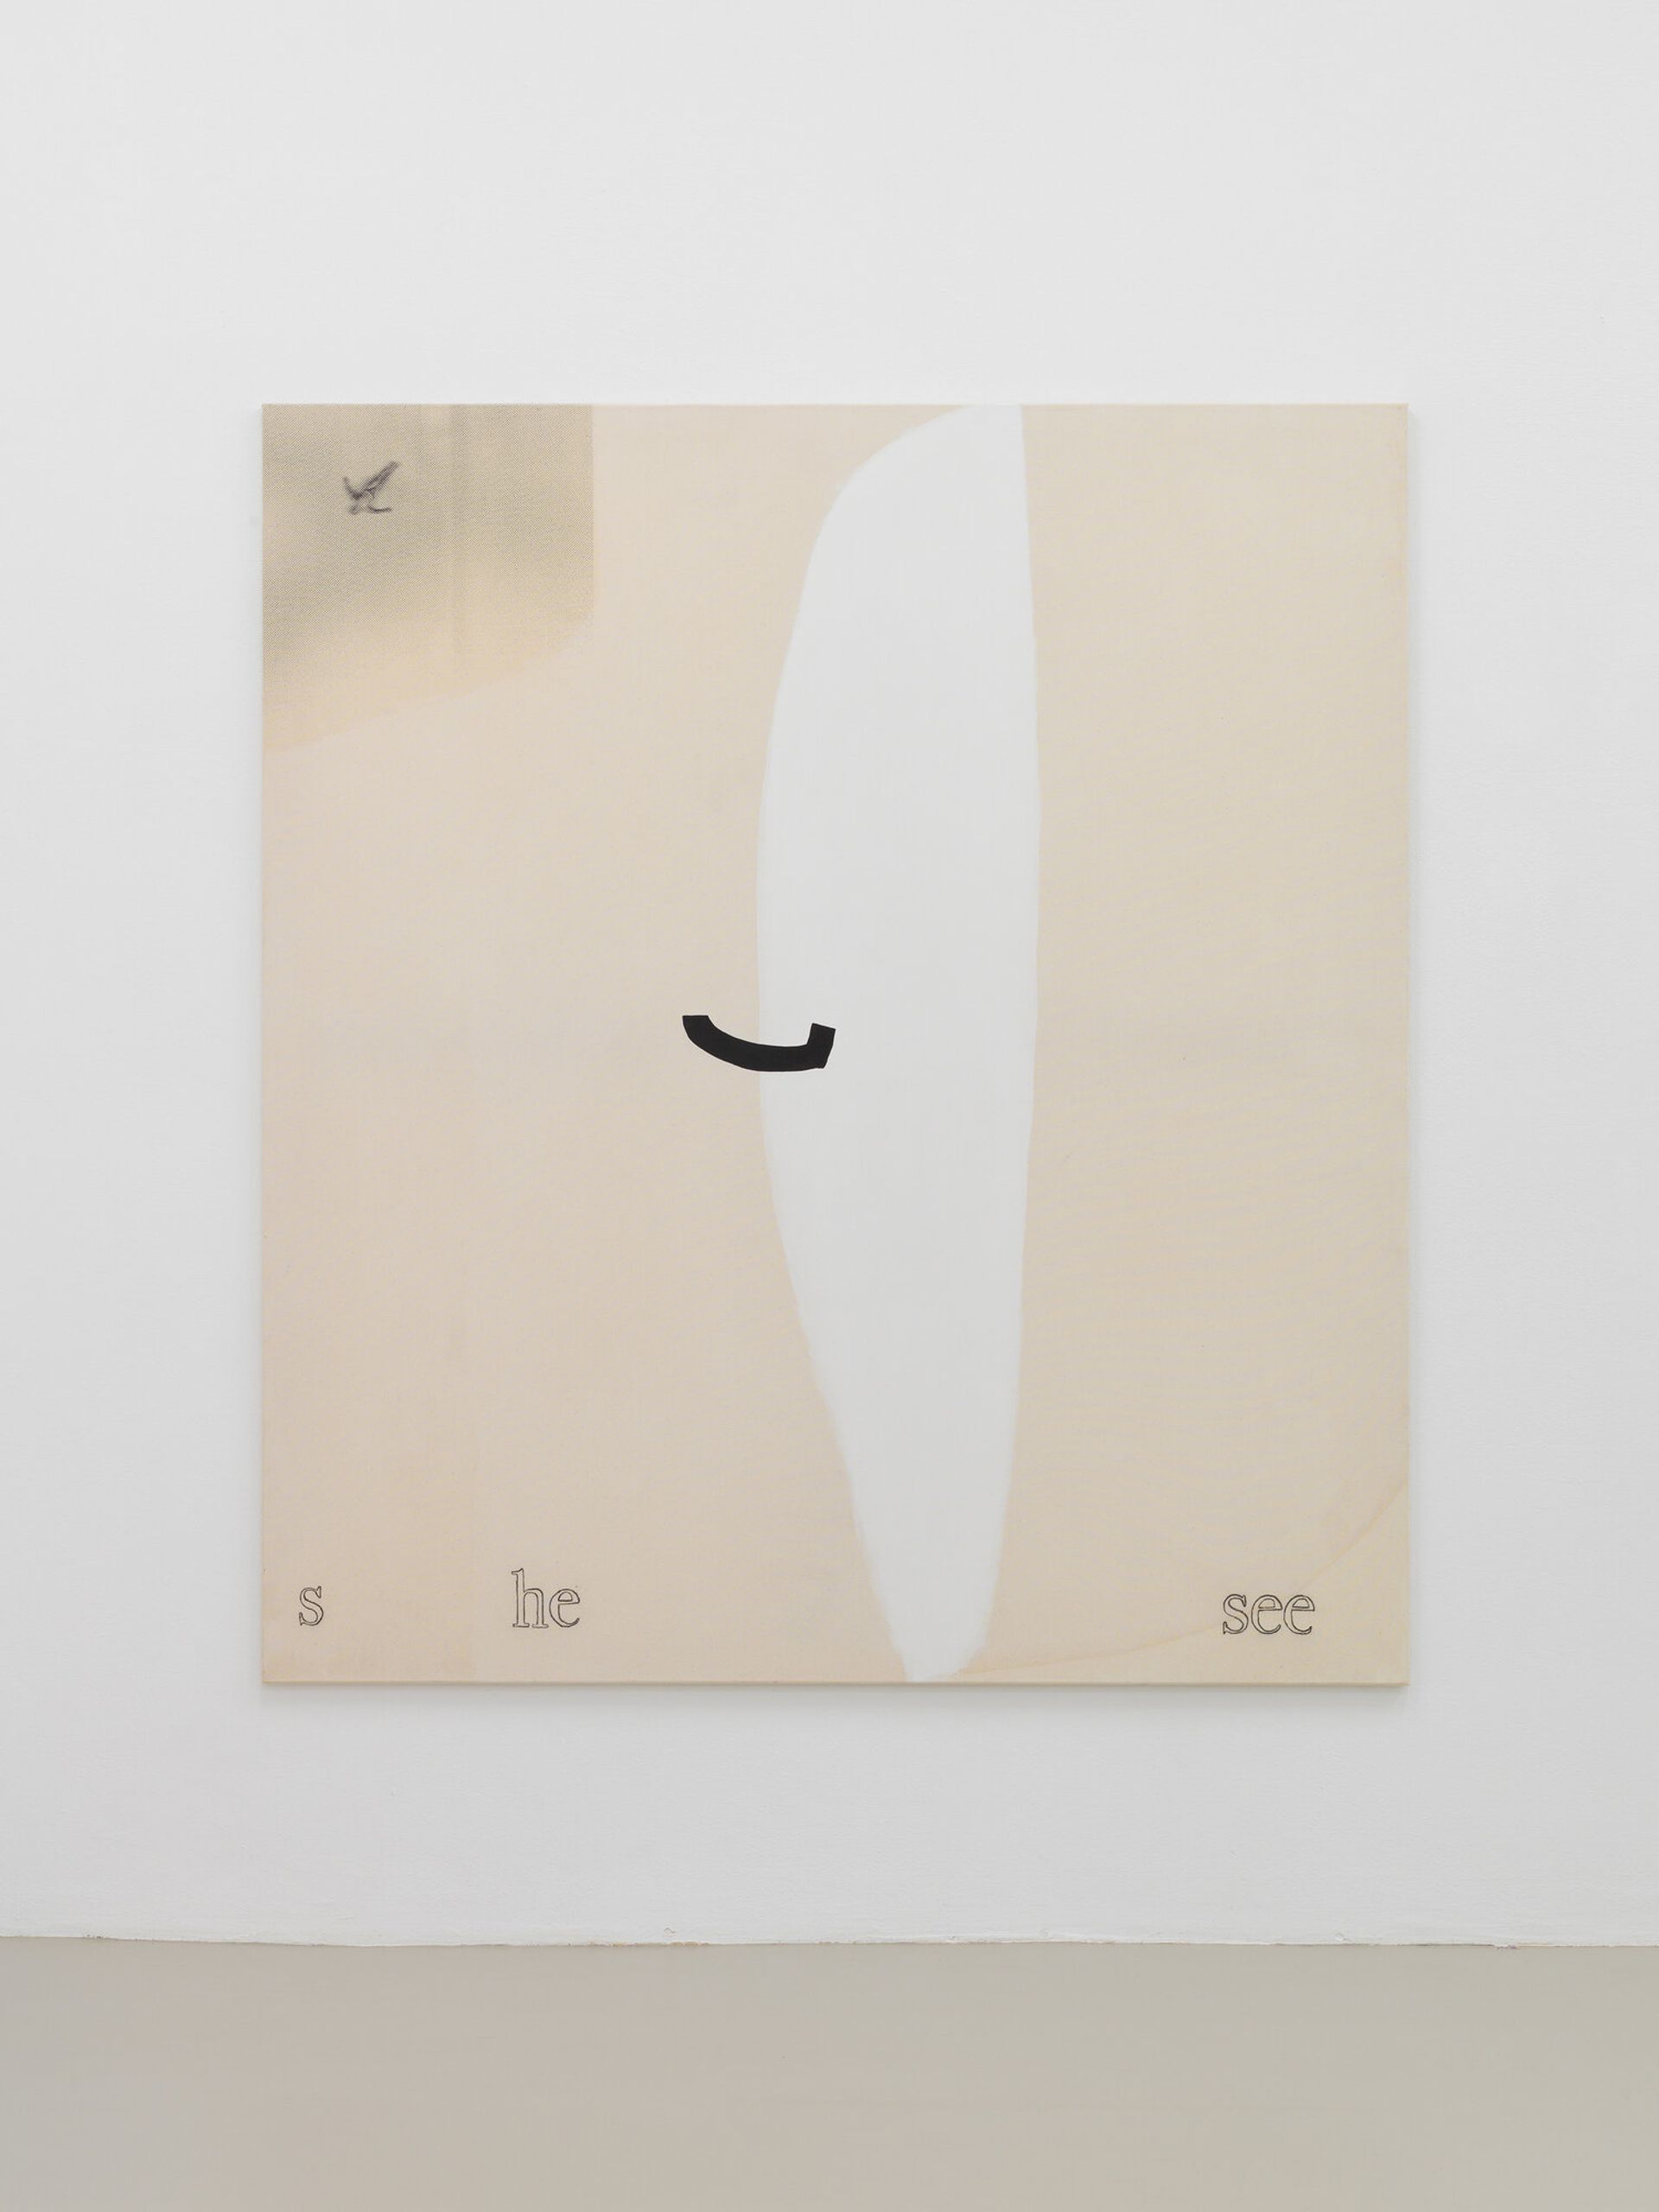 Malte Zenses, die Schwimmer, but she seems fine, 2017, silkscreen, lacquer and charcoal on canvas, 190 × 170 × 3 cm
